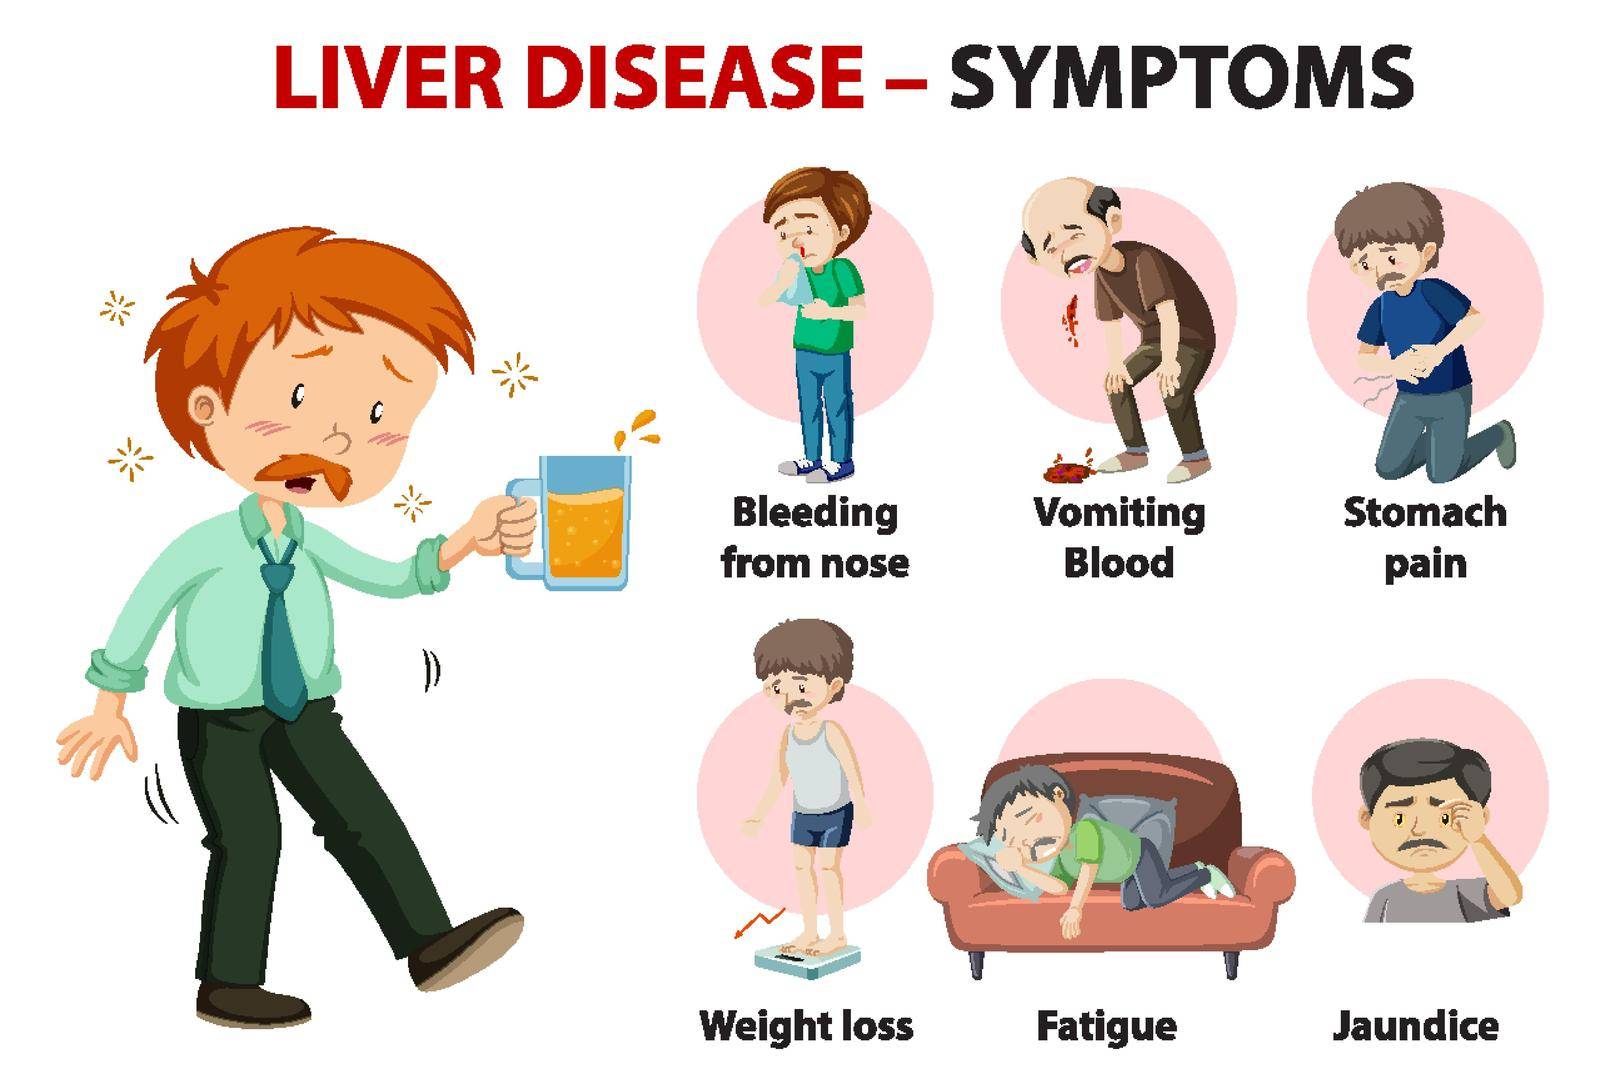 Liver disease symptoms cartoon style cartoon style infographic by iimages